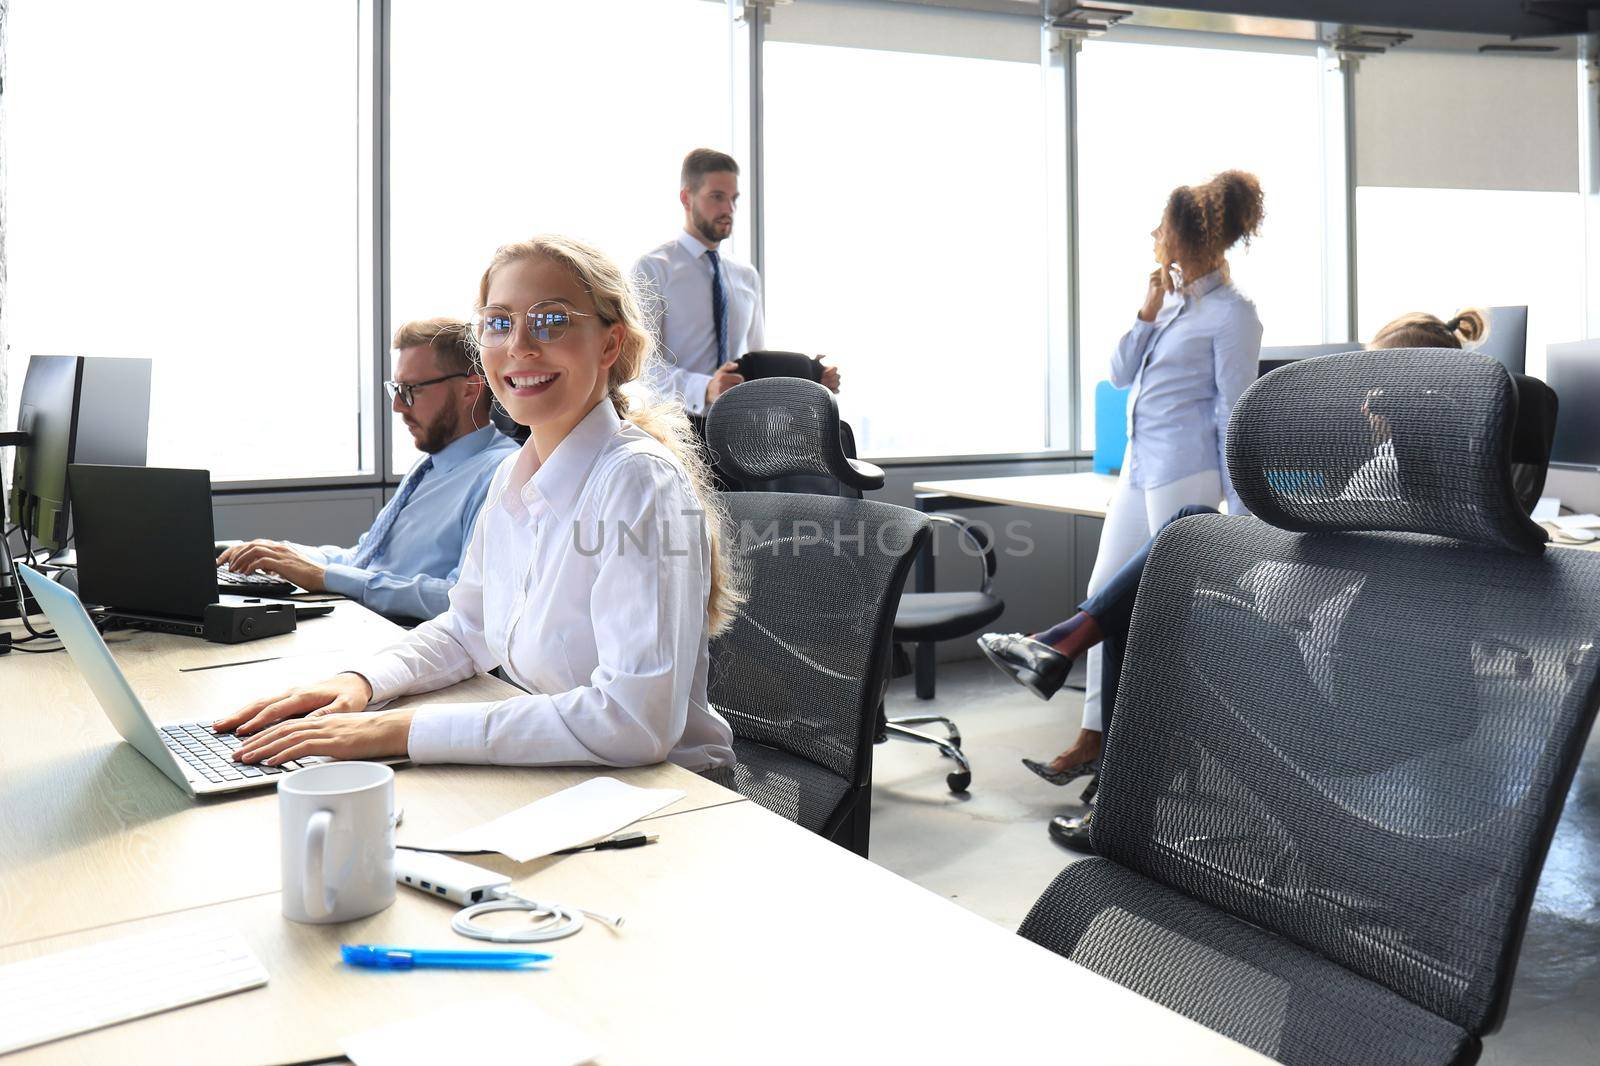 Joyful businesswoman in formalwear working on laptop in the modern office with collegues on the background.